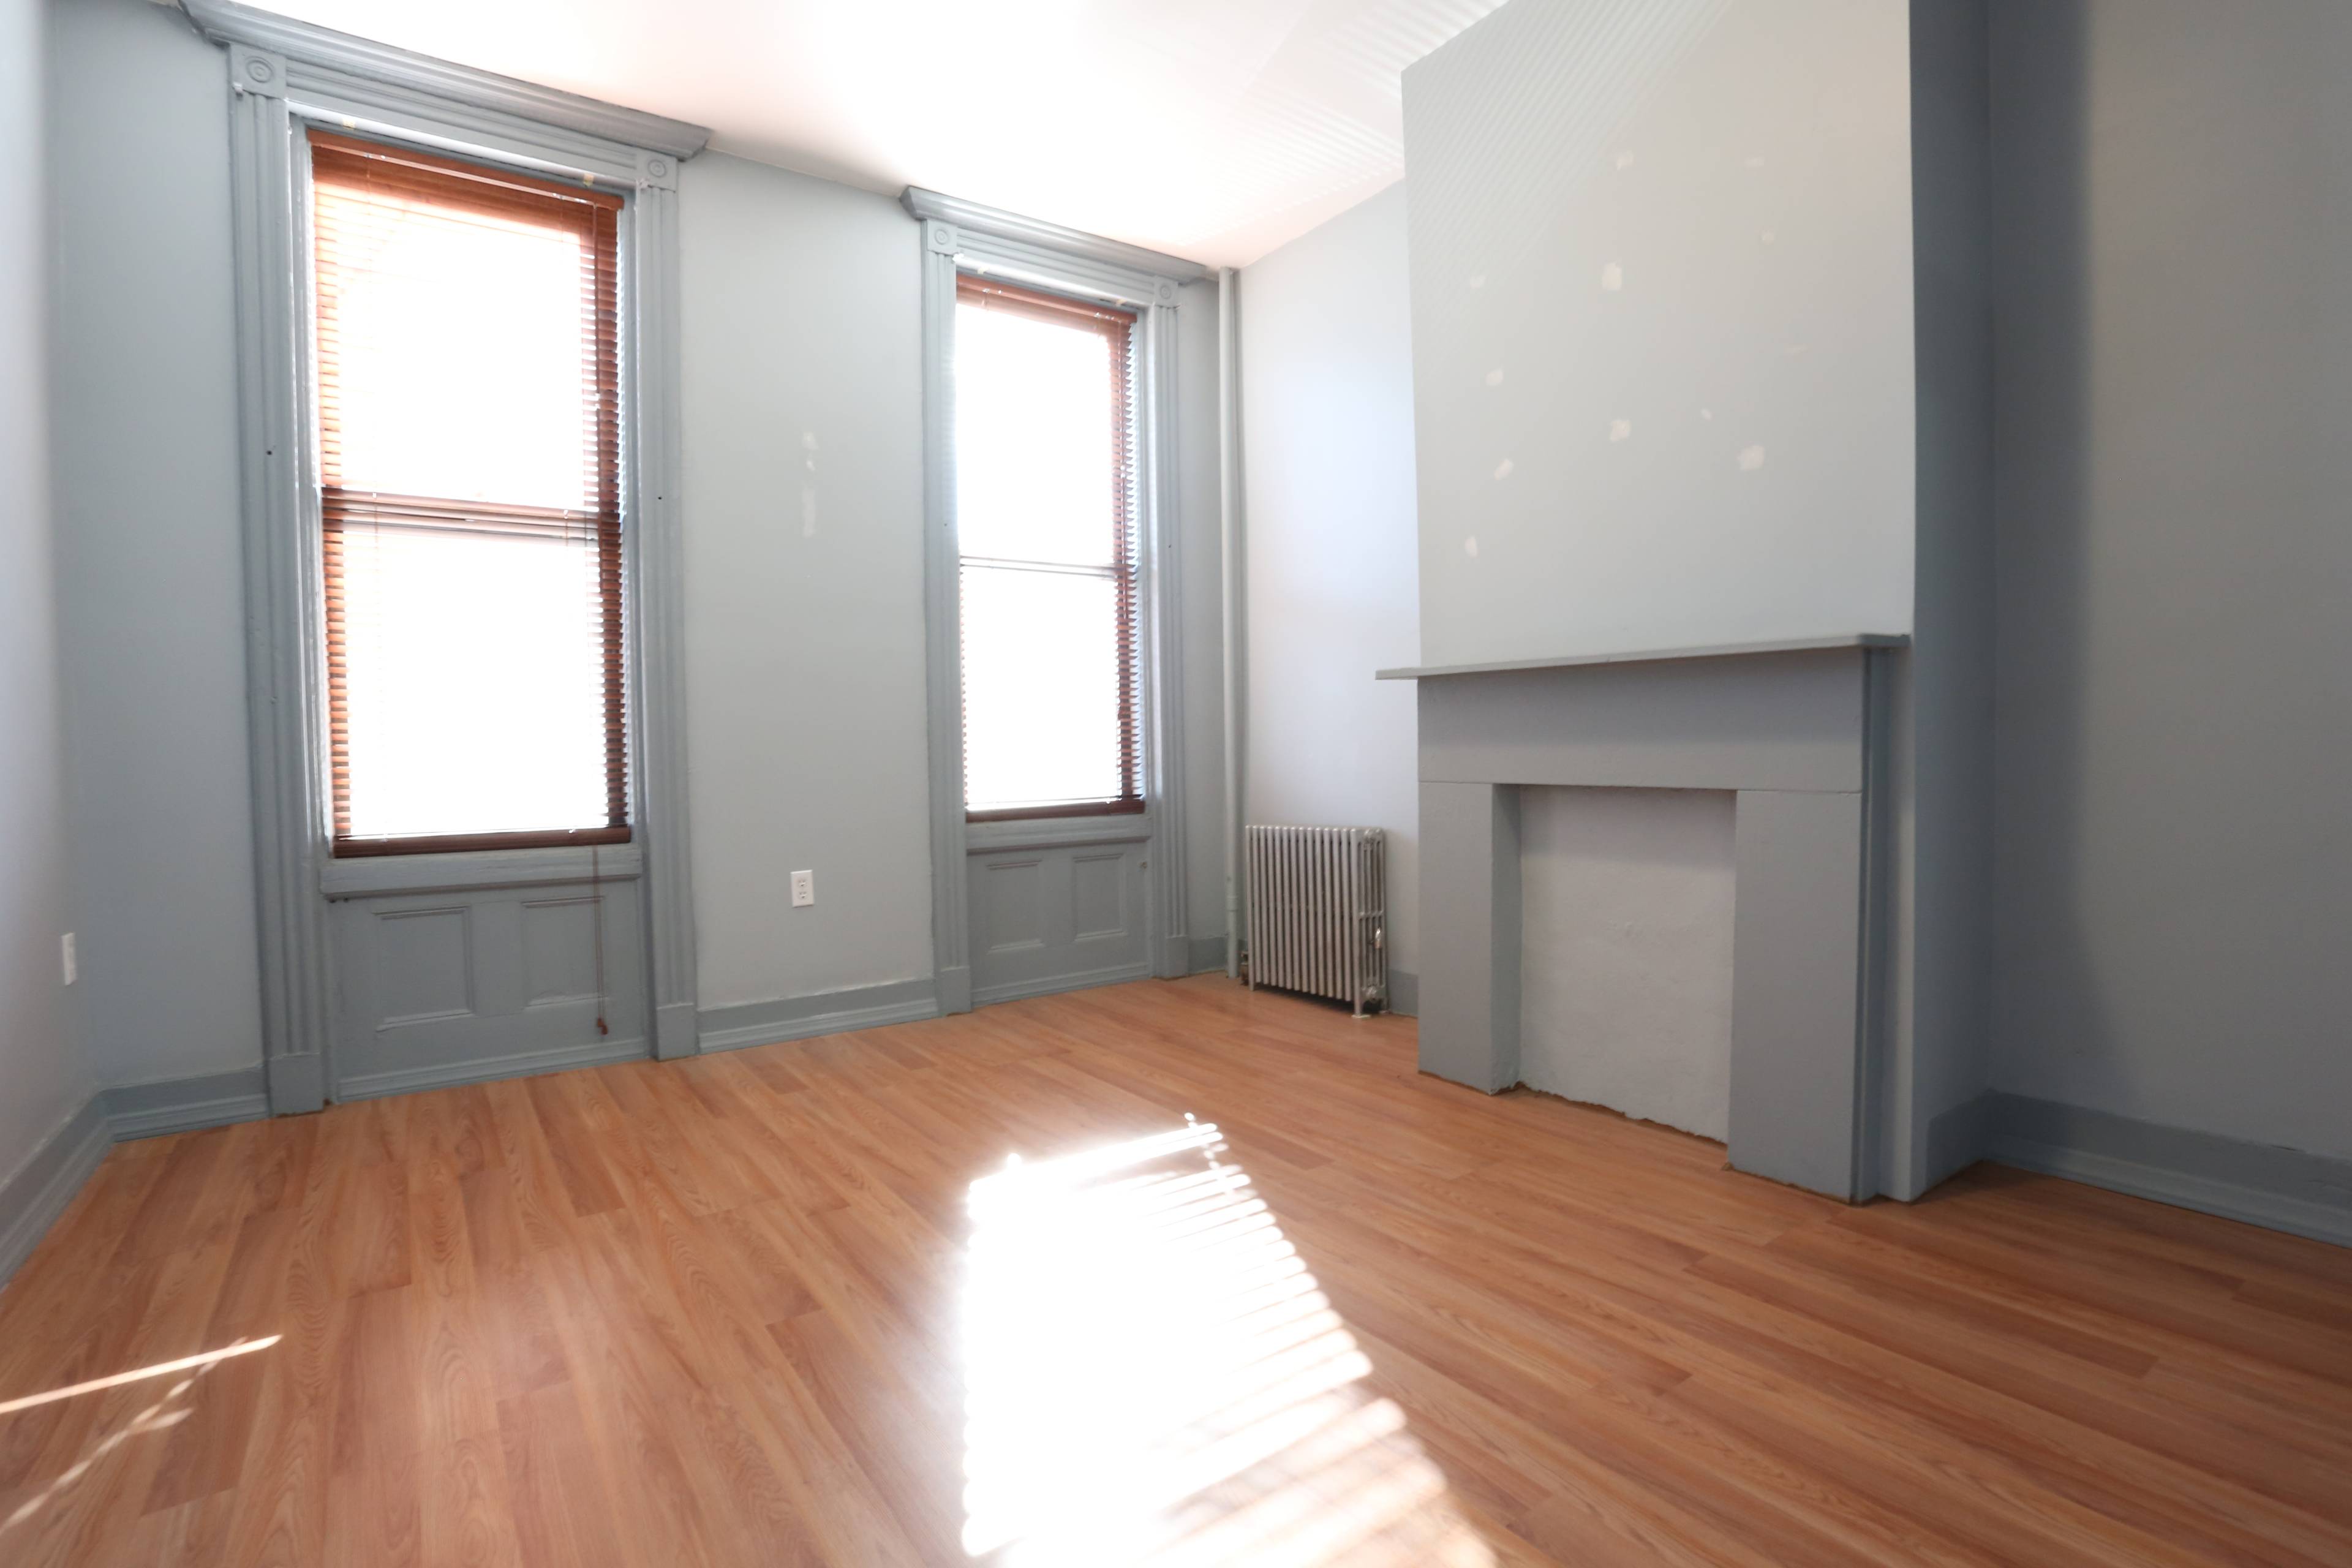 Spacious Railrod Style in Greenpoint! 